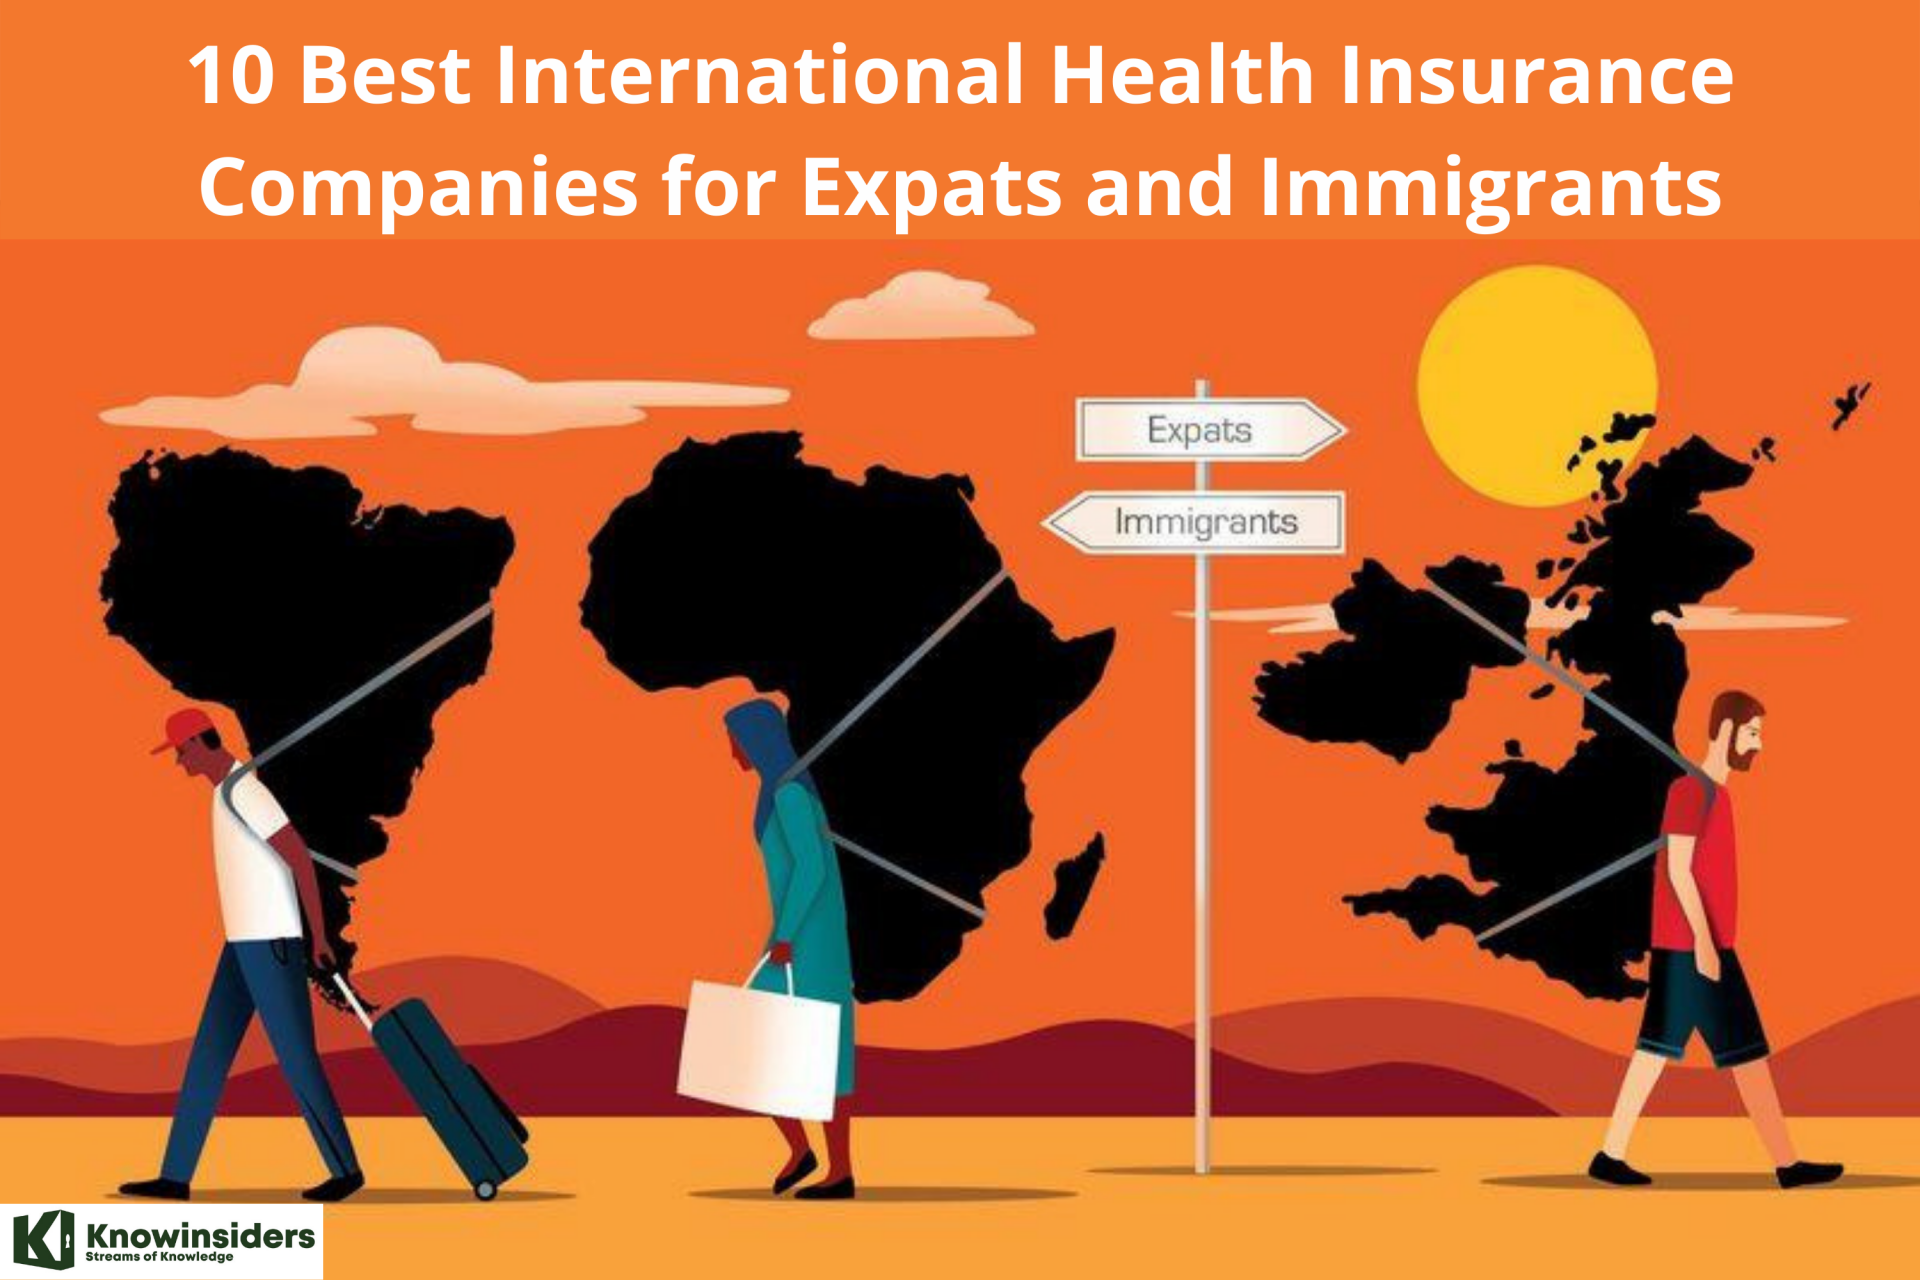 10 Largest And Best International Health Insurance Companies for Expats and Immigrants